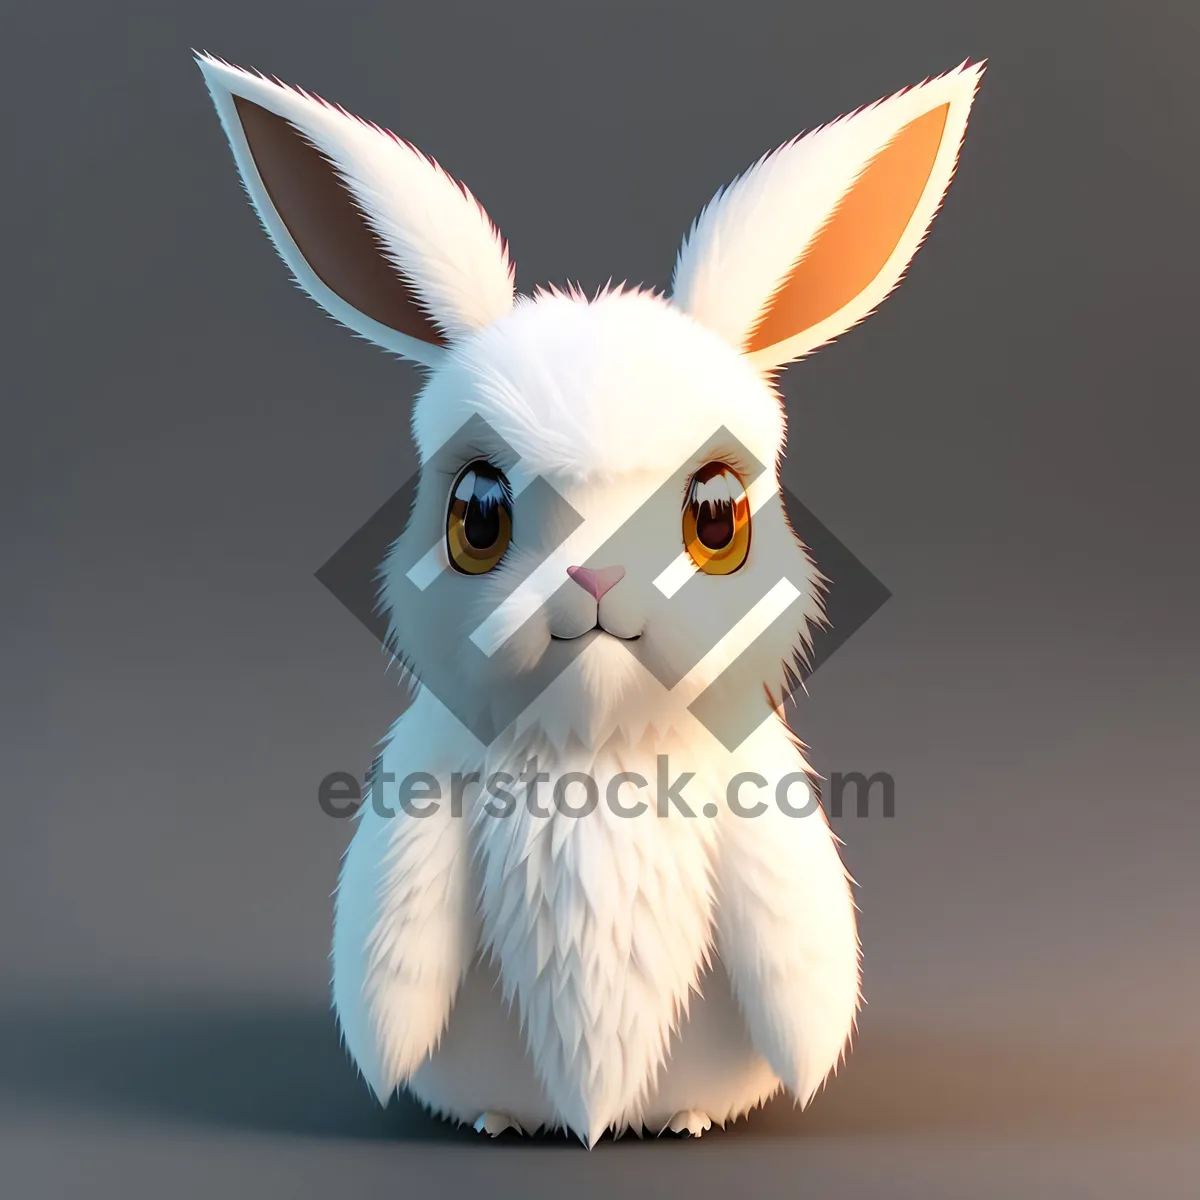 Picture of Cute Bunny with Fluffy Ears and Adorable Eyes